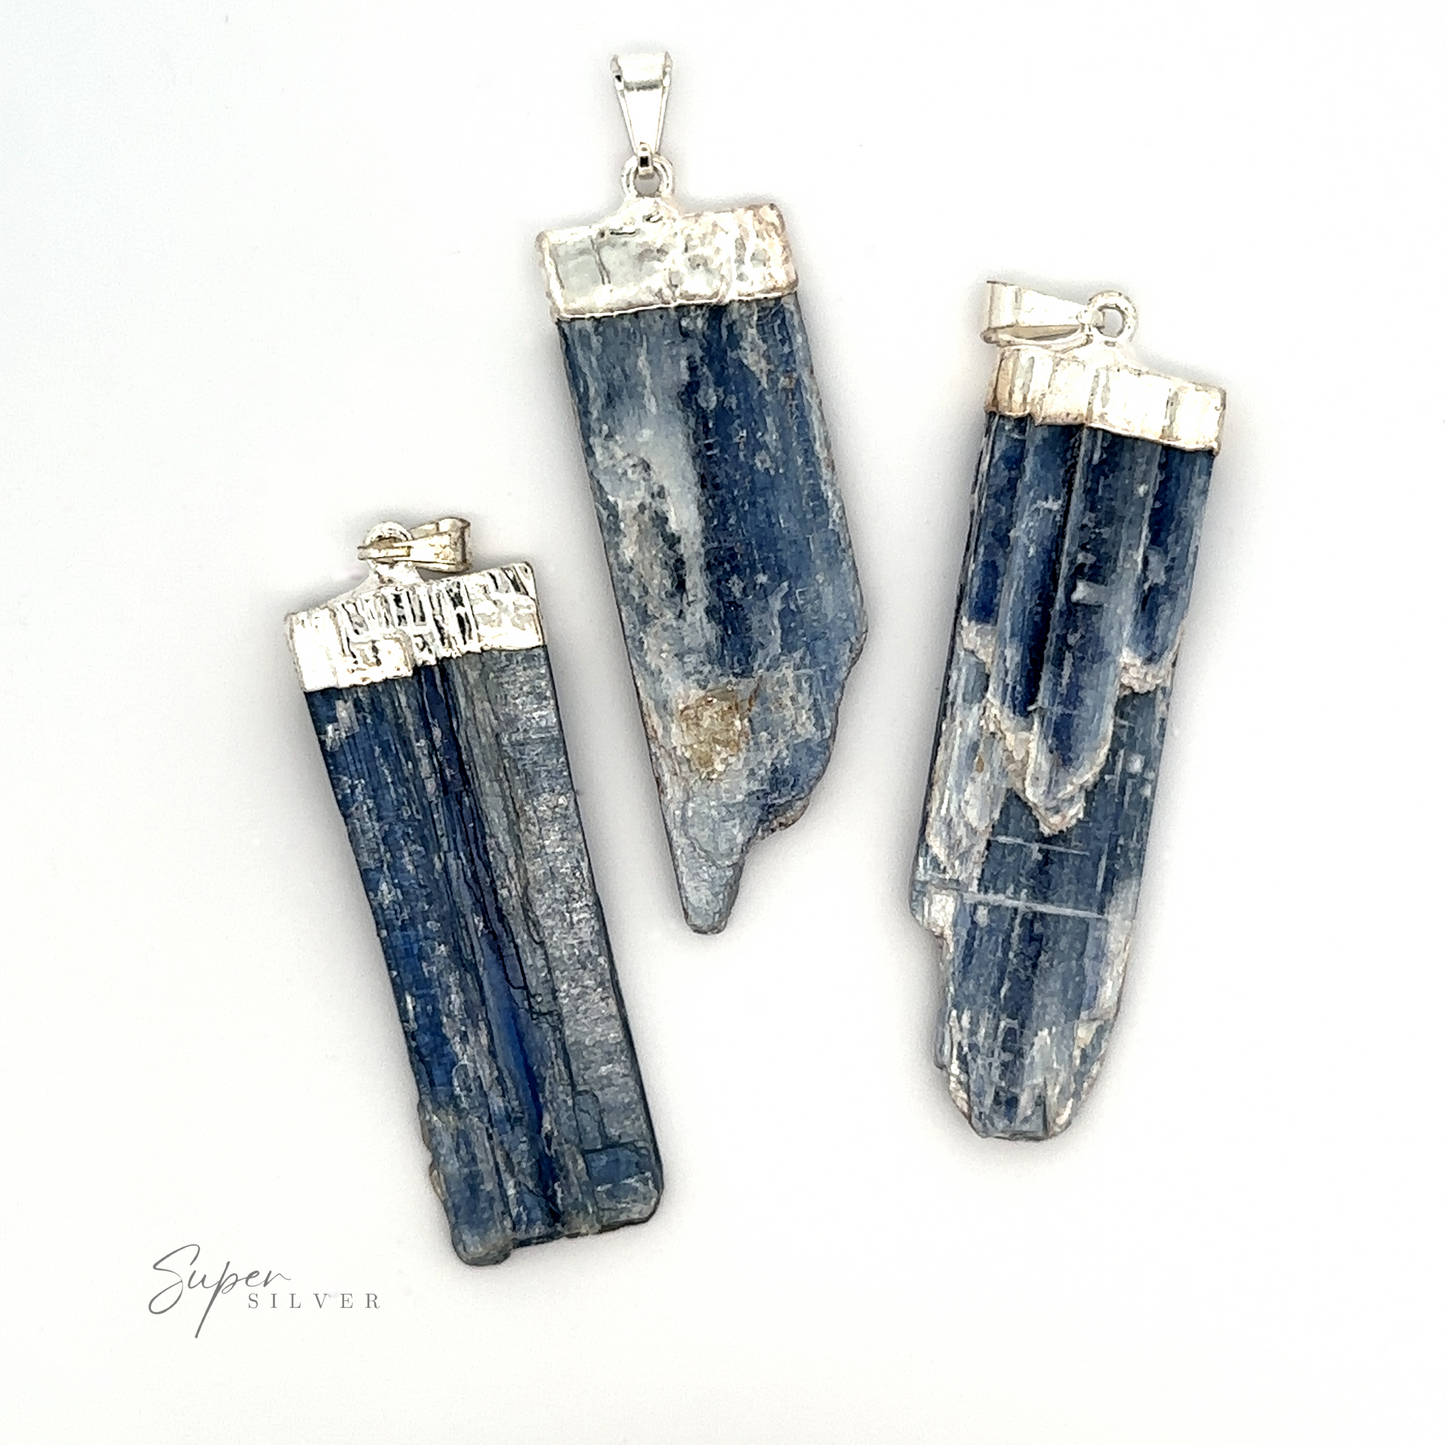 
                  
                    Three blue kyanite Raw Crystal Pendants With Silver Cap arranged on a white background. Text "Super Silver" in the bottom left corner, showcasing these stunning Natural Gemstone pendants.
                  
                